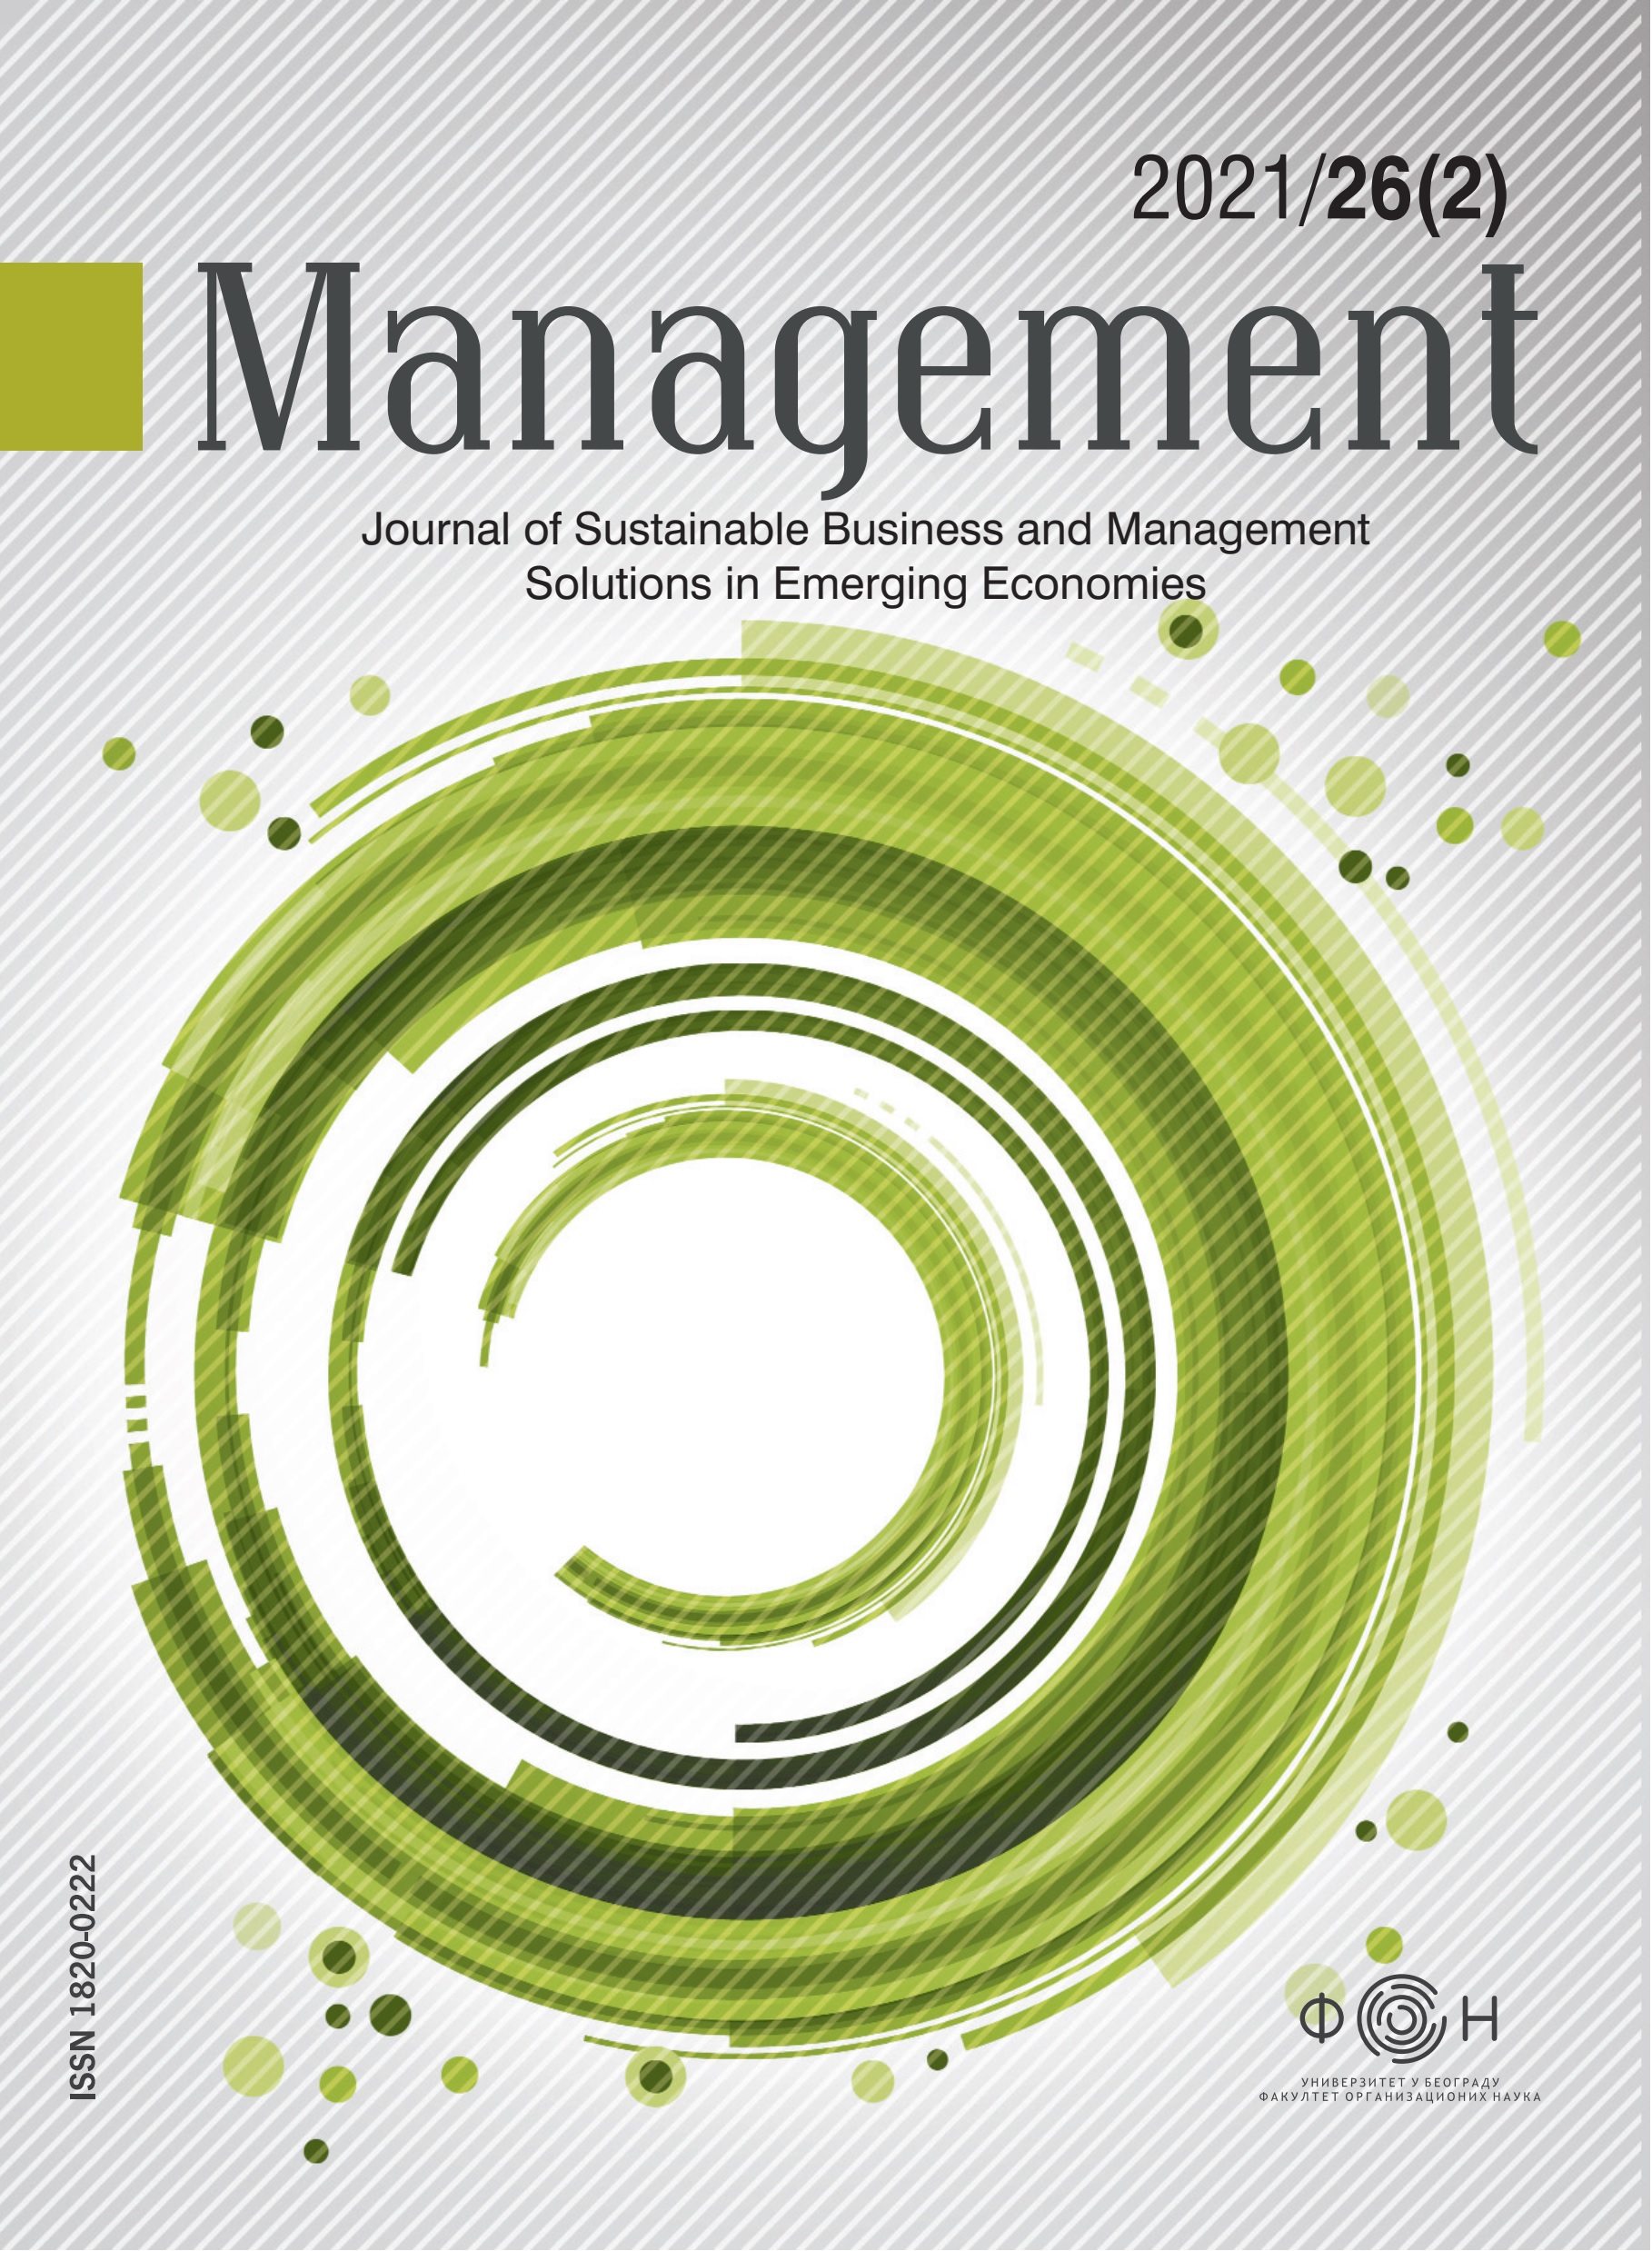 Entry Mode Strategy and Firm Performance in Emerging Economy: Moderating Role of Organisational Structure and Environmental Turbulence